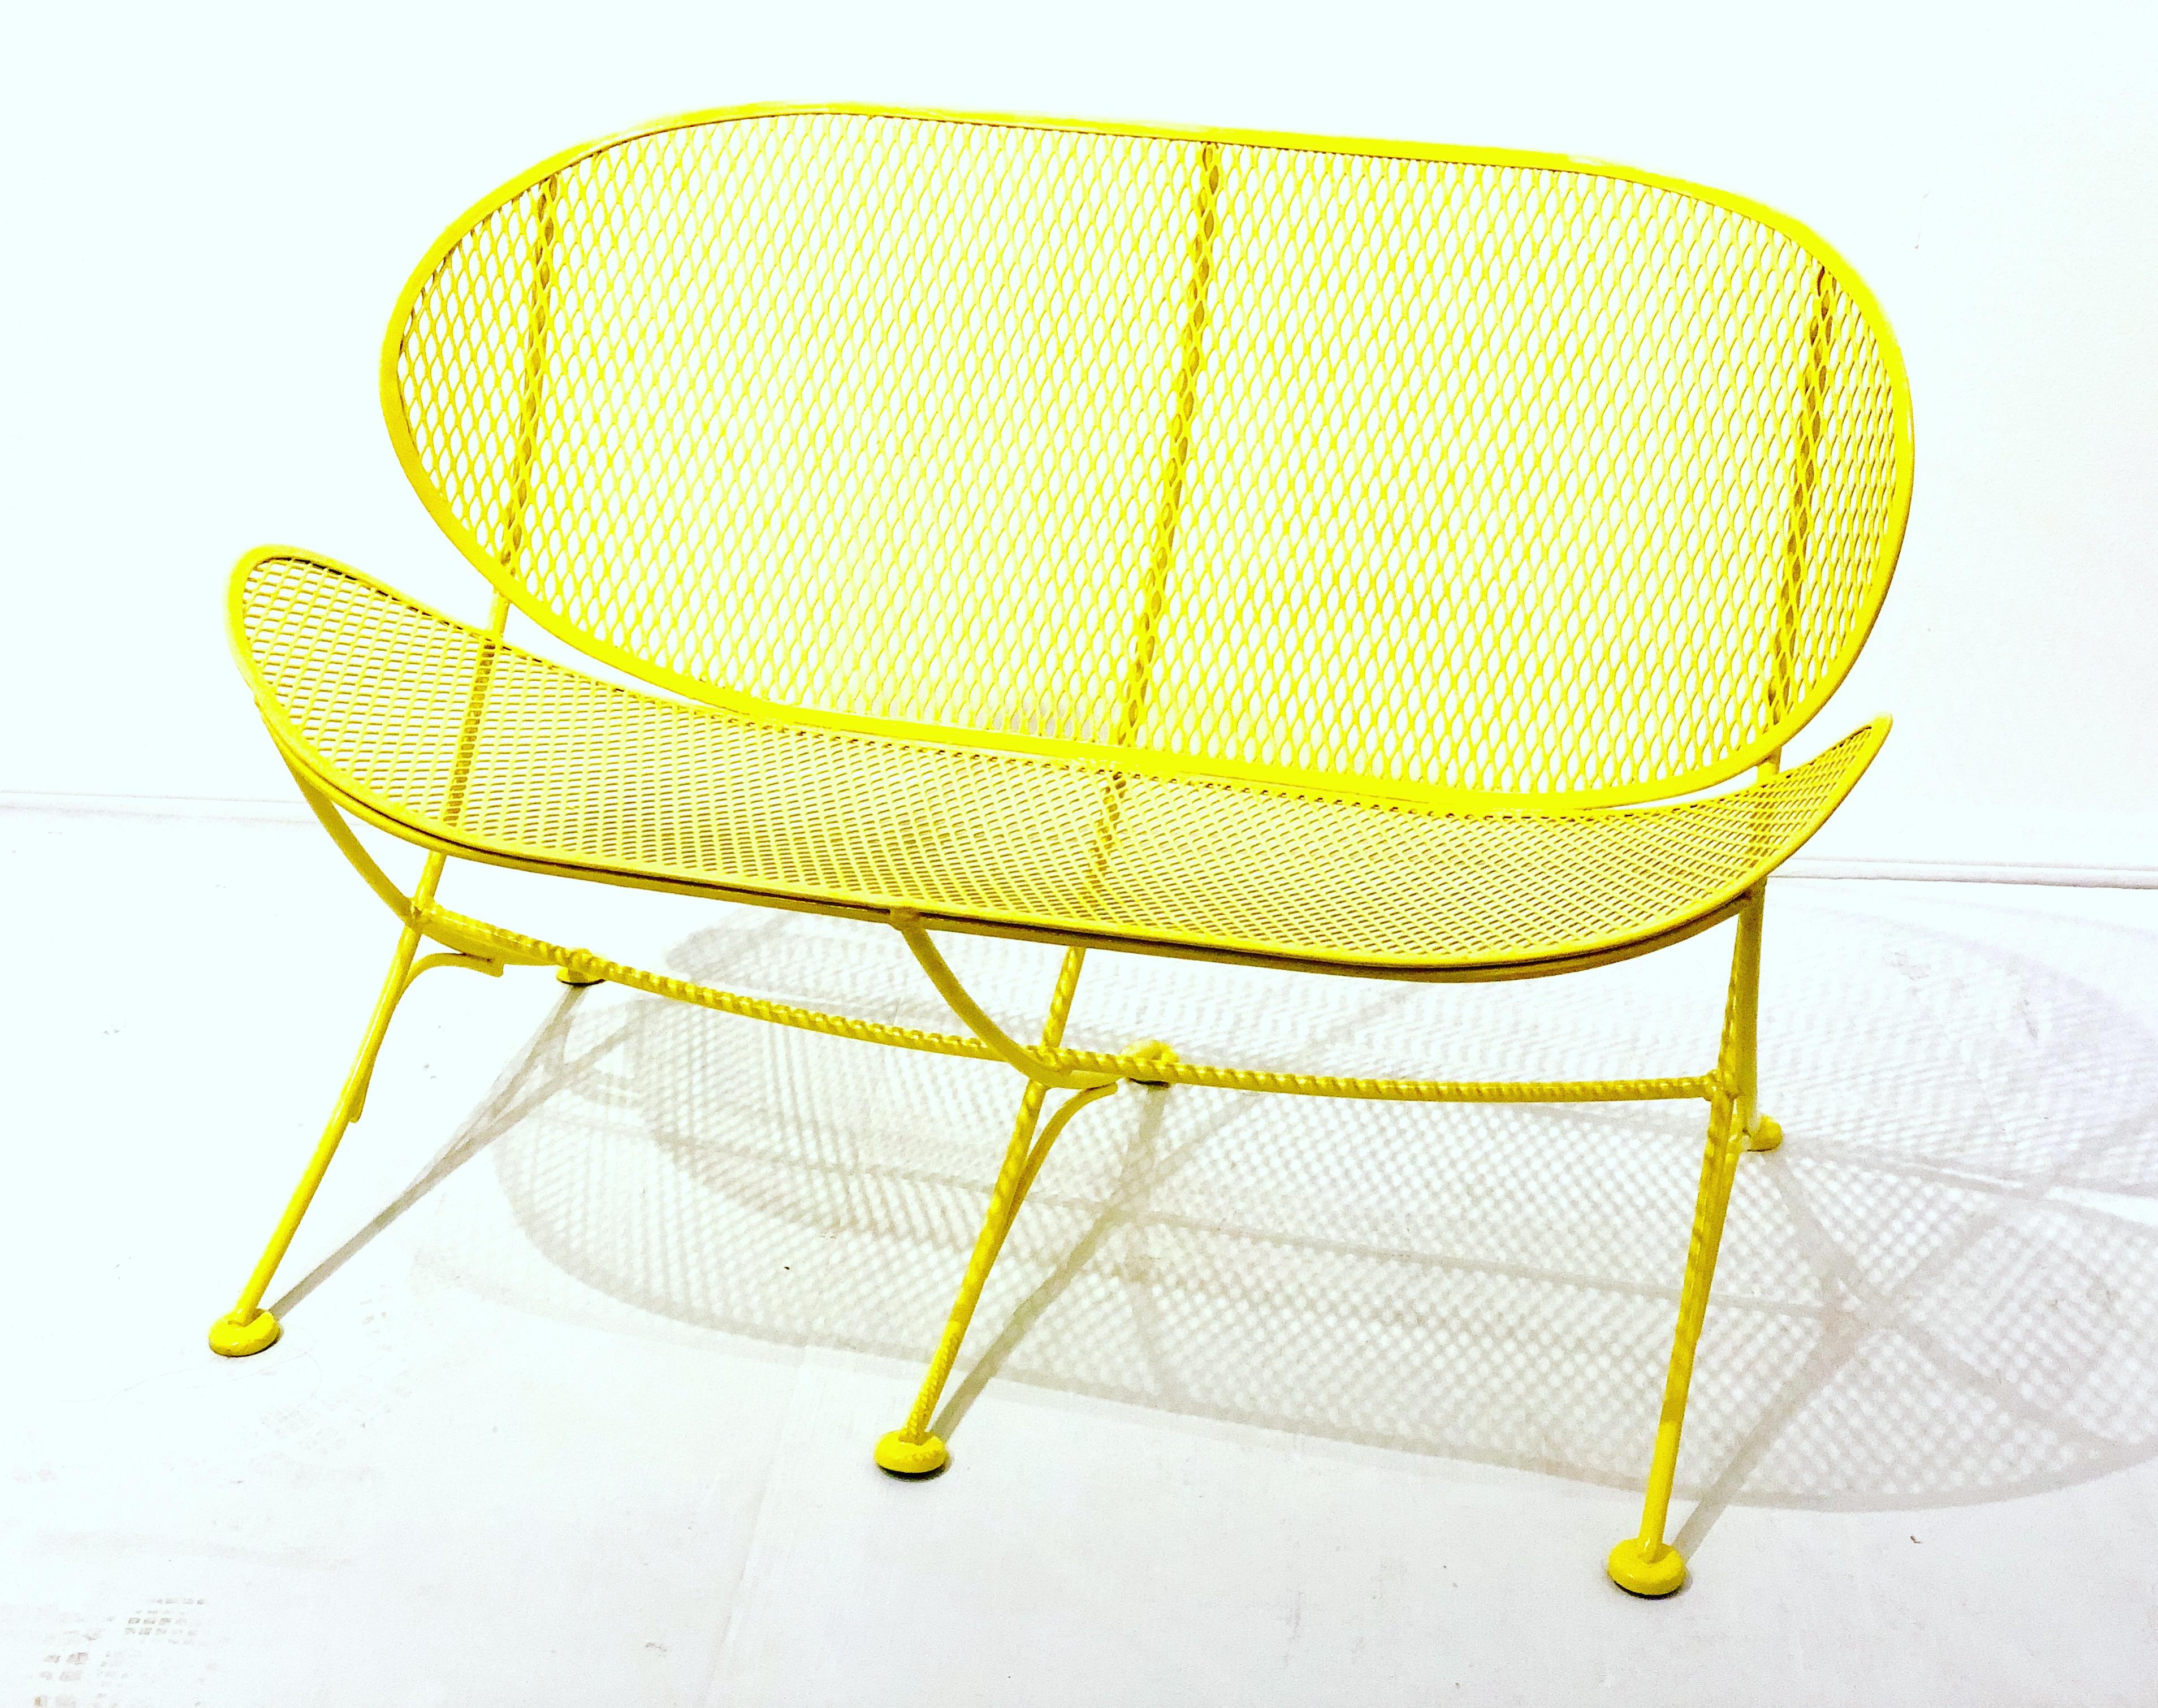 Outdoor clam shell lounge patio loveseat designed by Maurizio Tempestini and manufactured Salterini can be used on the terrace, patio, porch or in the garden. This piece its all-iron and has been repainted in yellow has that perfect 1950s Atomic